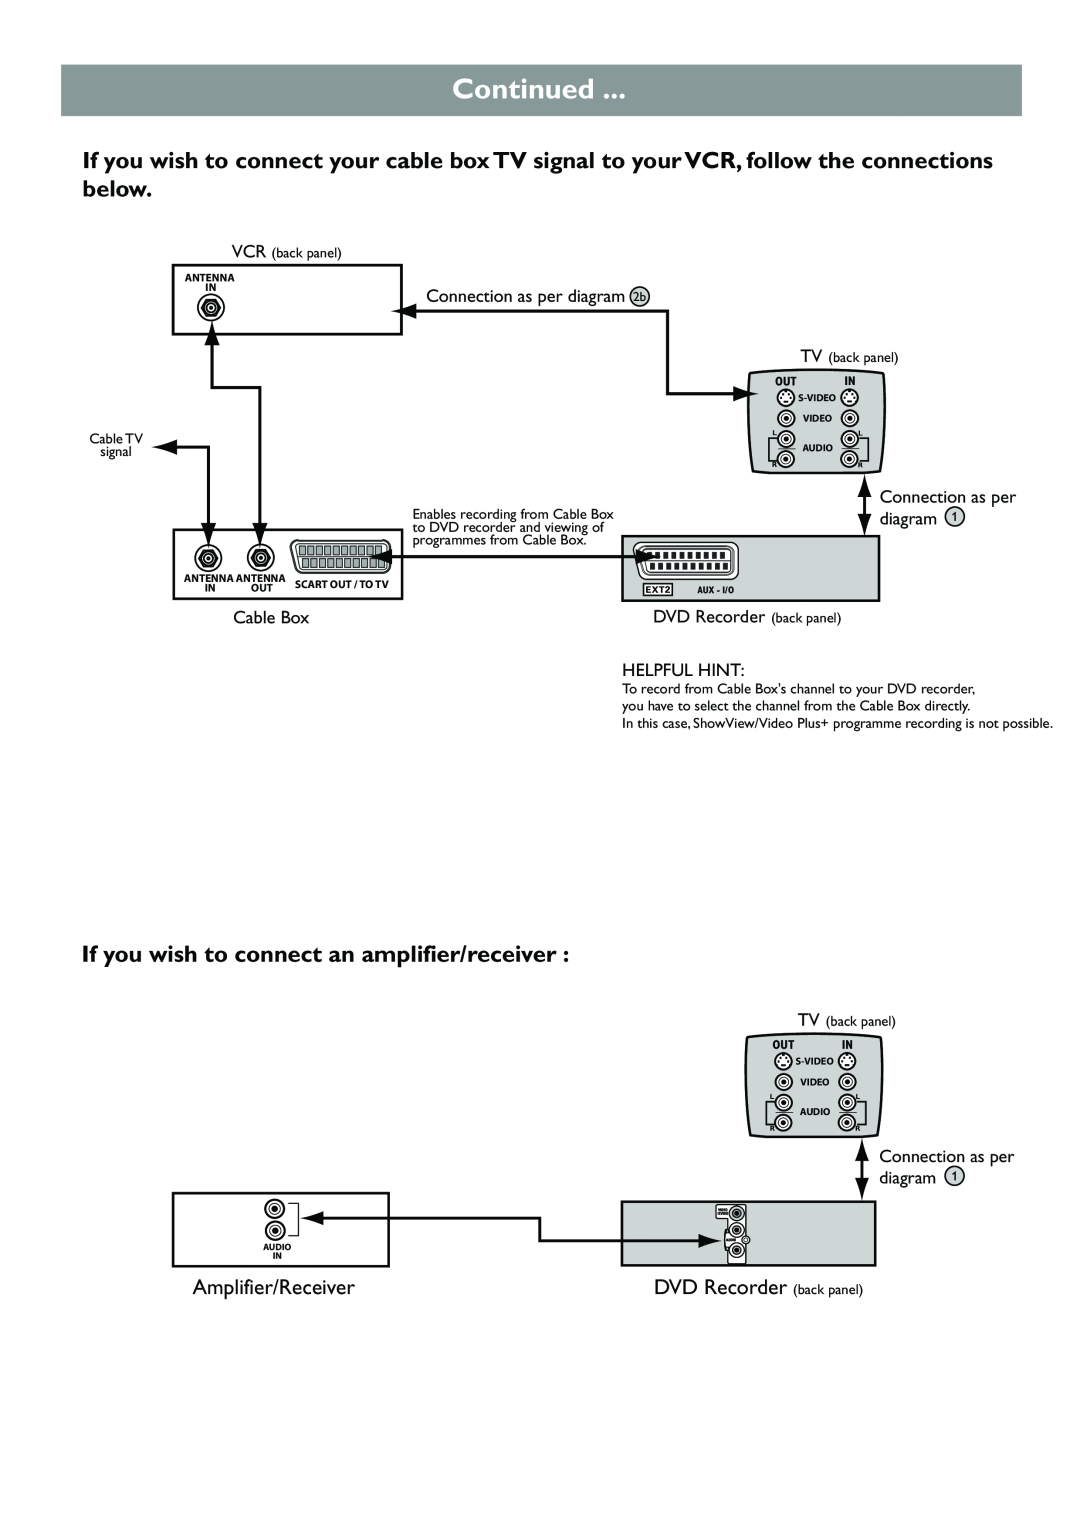 Philips DVDR612 Continued, Amplifier/Receiver, DVD Recorder back panel, Connection as per diagram 2b, Cable Box, Out In 